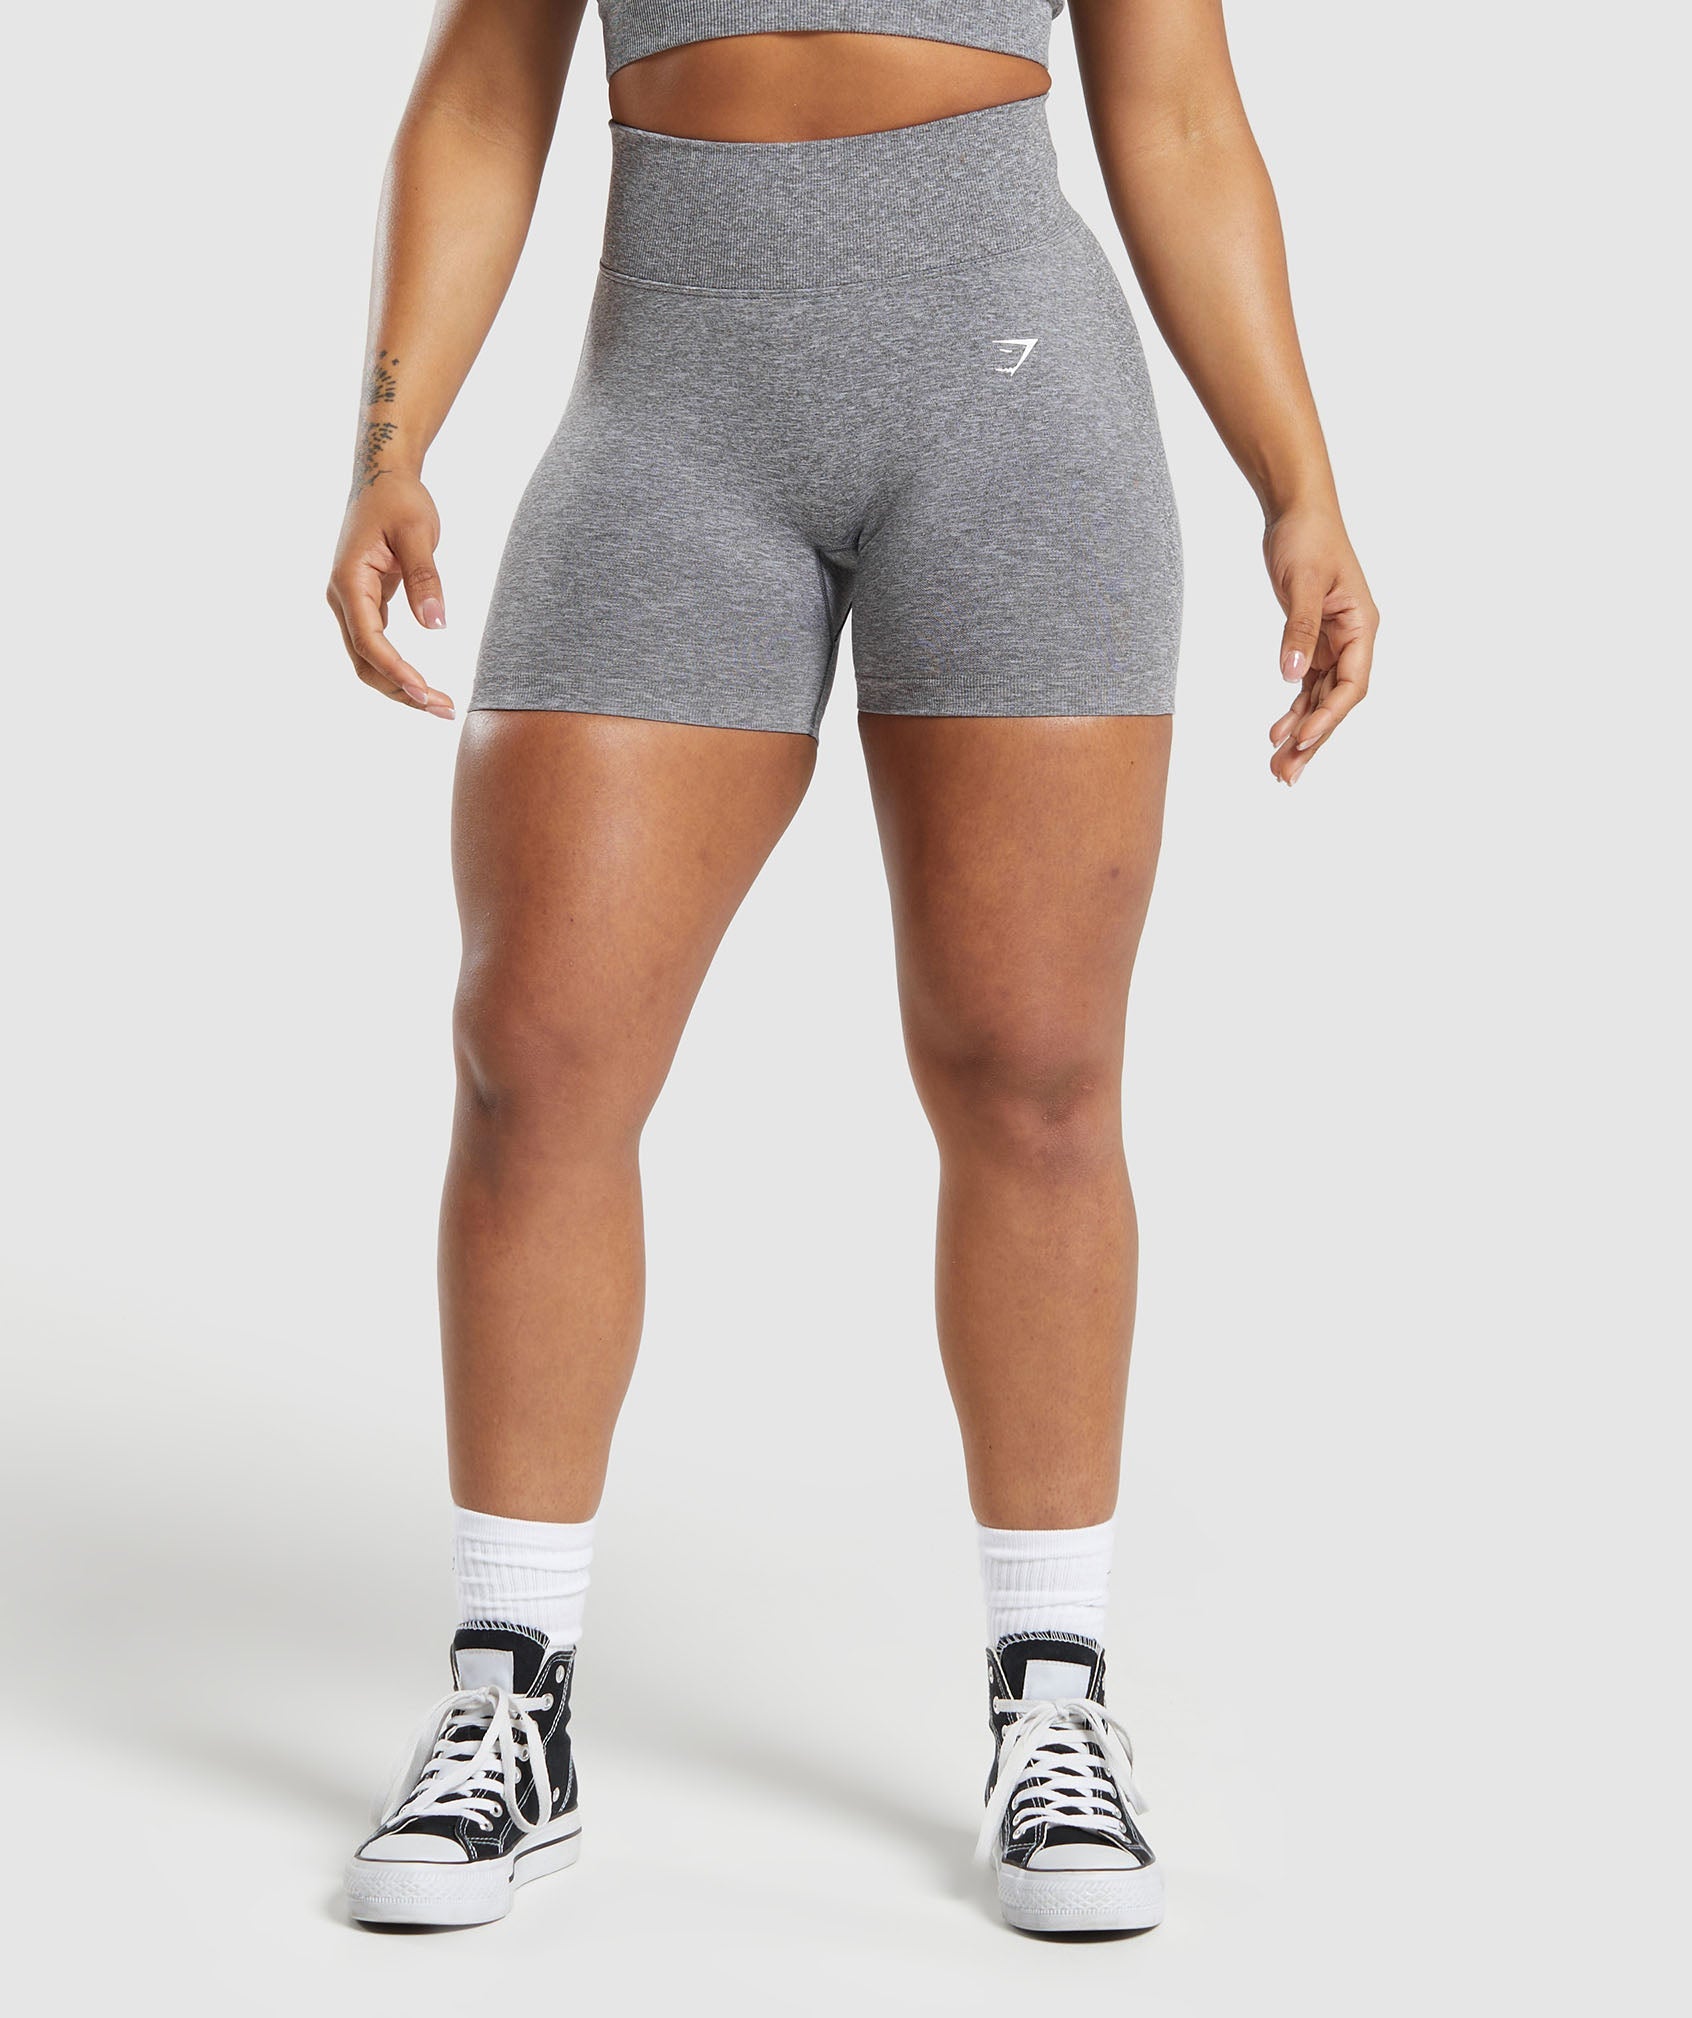 Lift Contour Seamless Shorts in Brushed Grey/White Marl